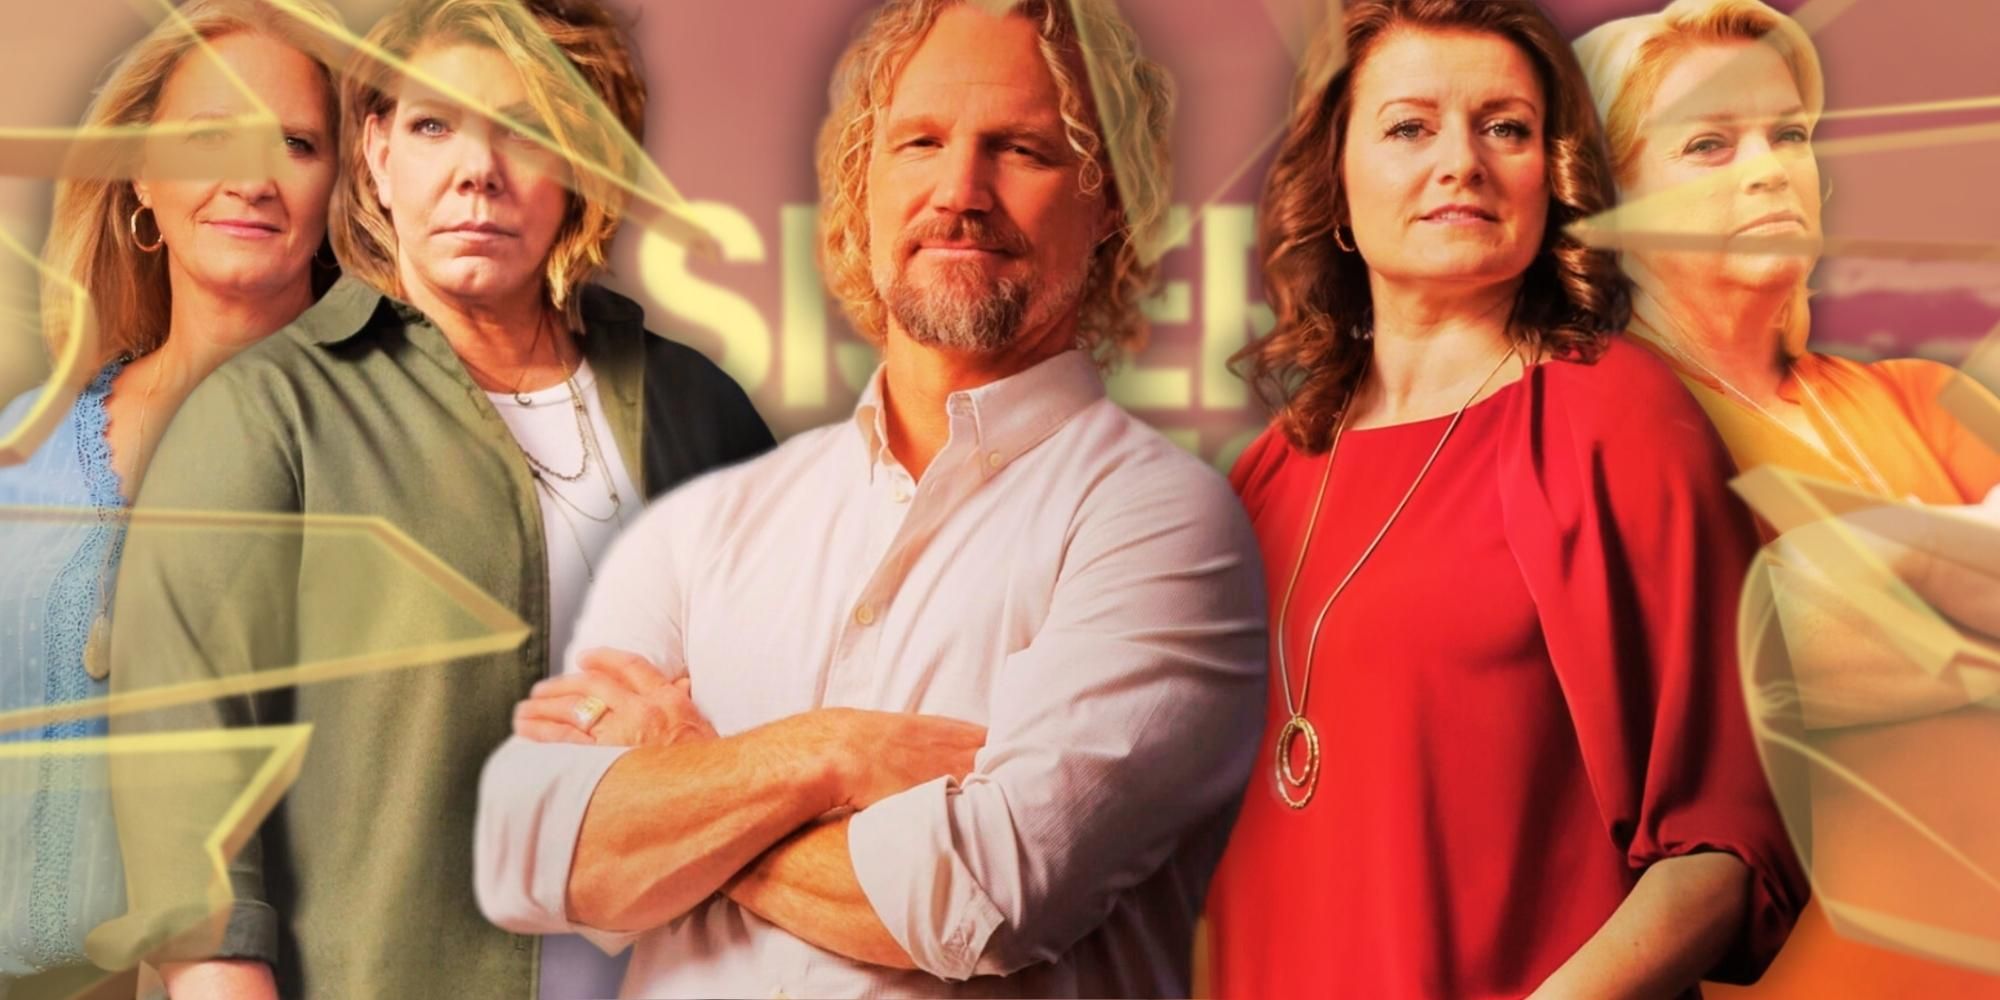 Sister Wives' Kody, Meri, Christine and Janelle Brown, with broken glass in front of them